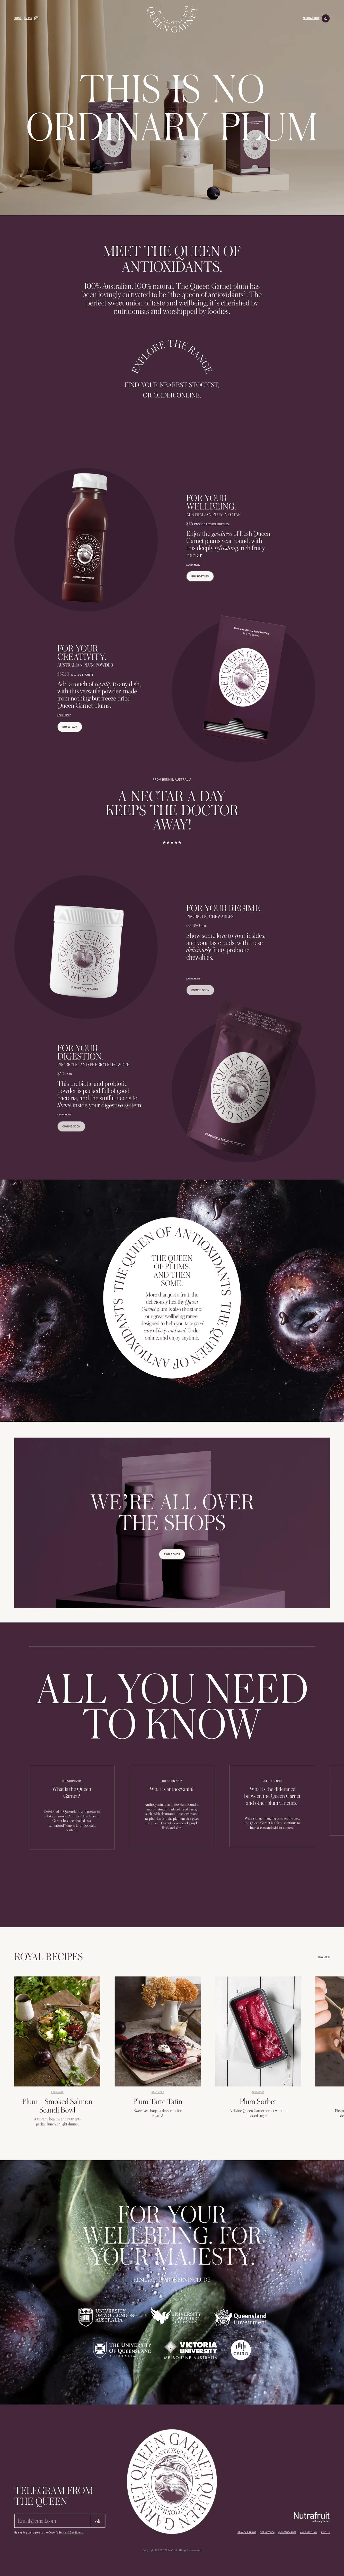 Queen Garnet Landing Page Example: 100% Australian. 100% natural. The Queen Garnet plum has been lovingly cultivated to be ‘the queen of antioxidants’. The perfect sweet union of taste and wellbeing, it’s cherished by nutritionists and worshipped by foodies.